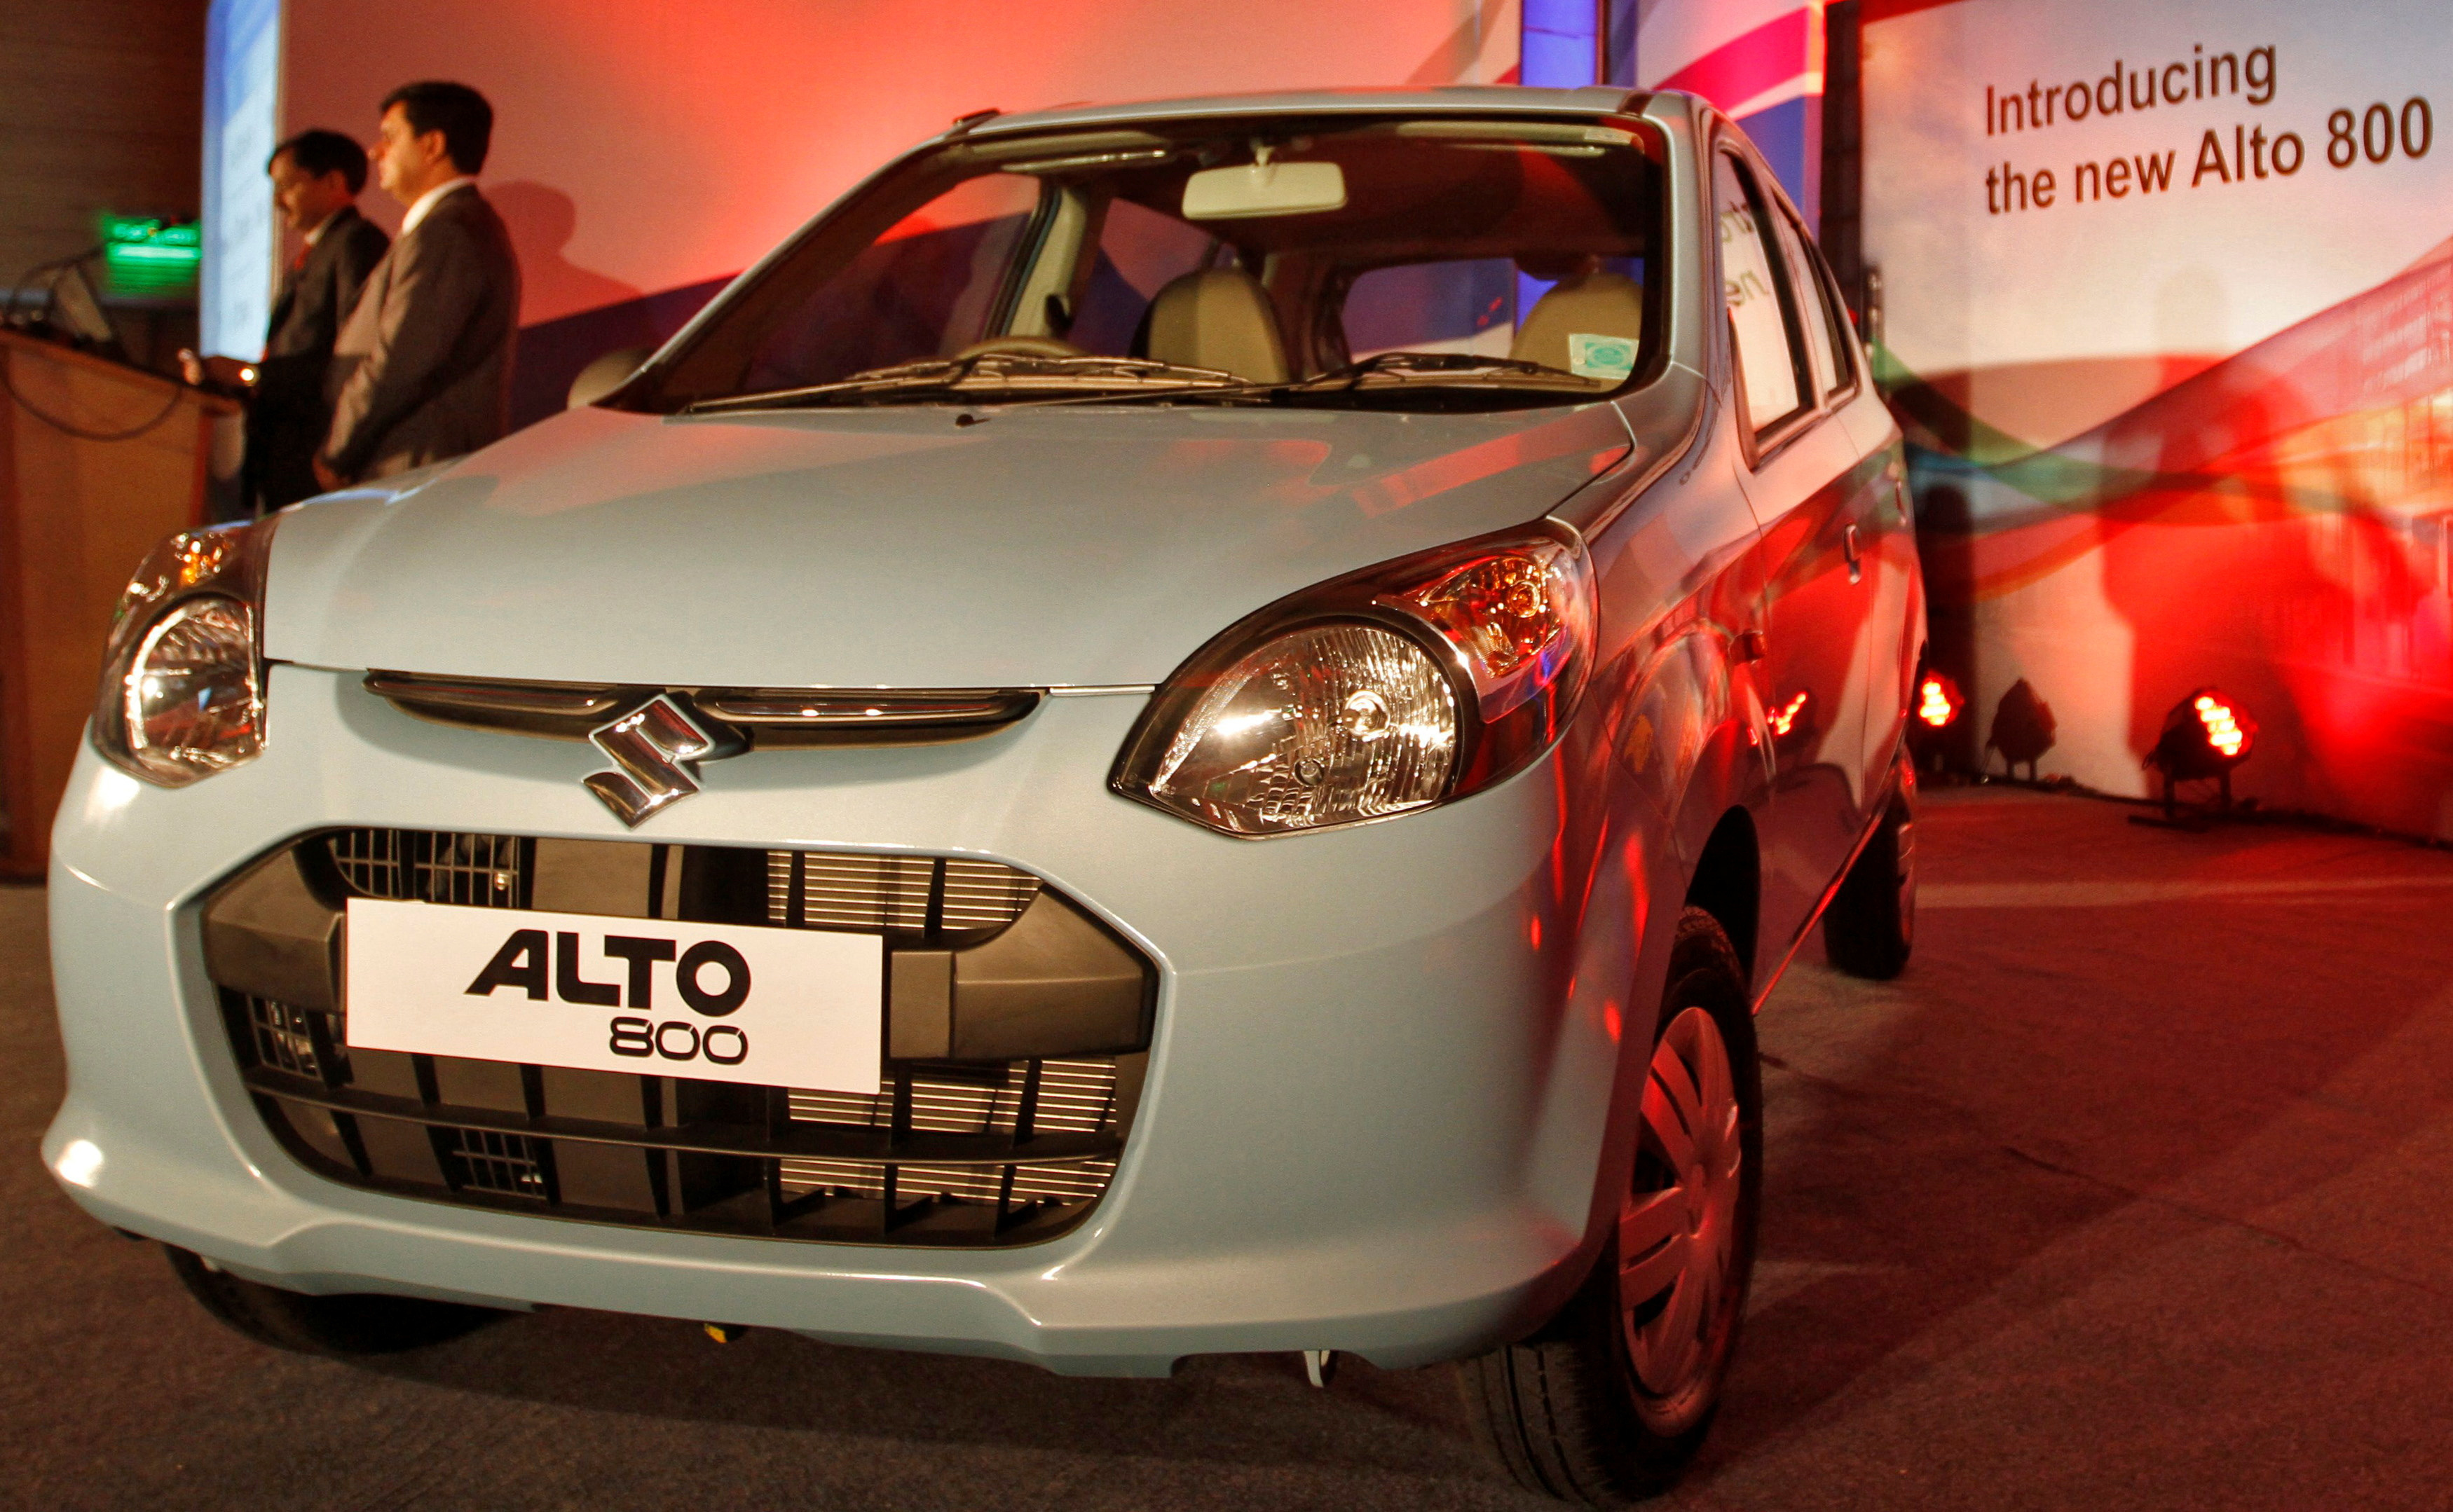 Officials stand next to the newly launched Maruti Suzuki Alto 800 car in Ahmedabad